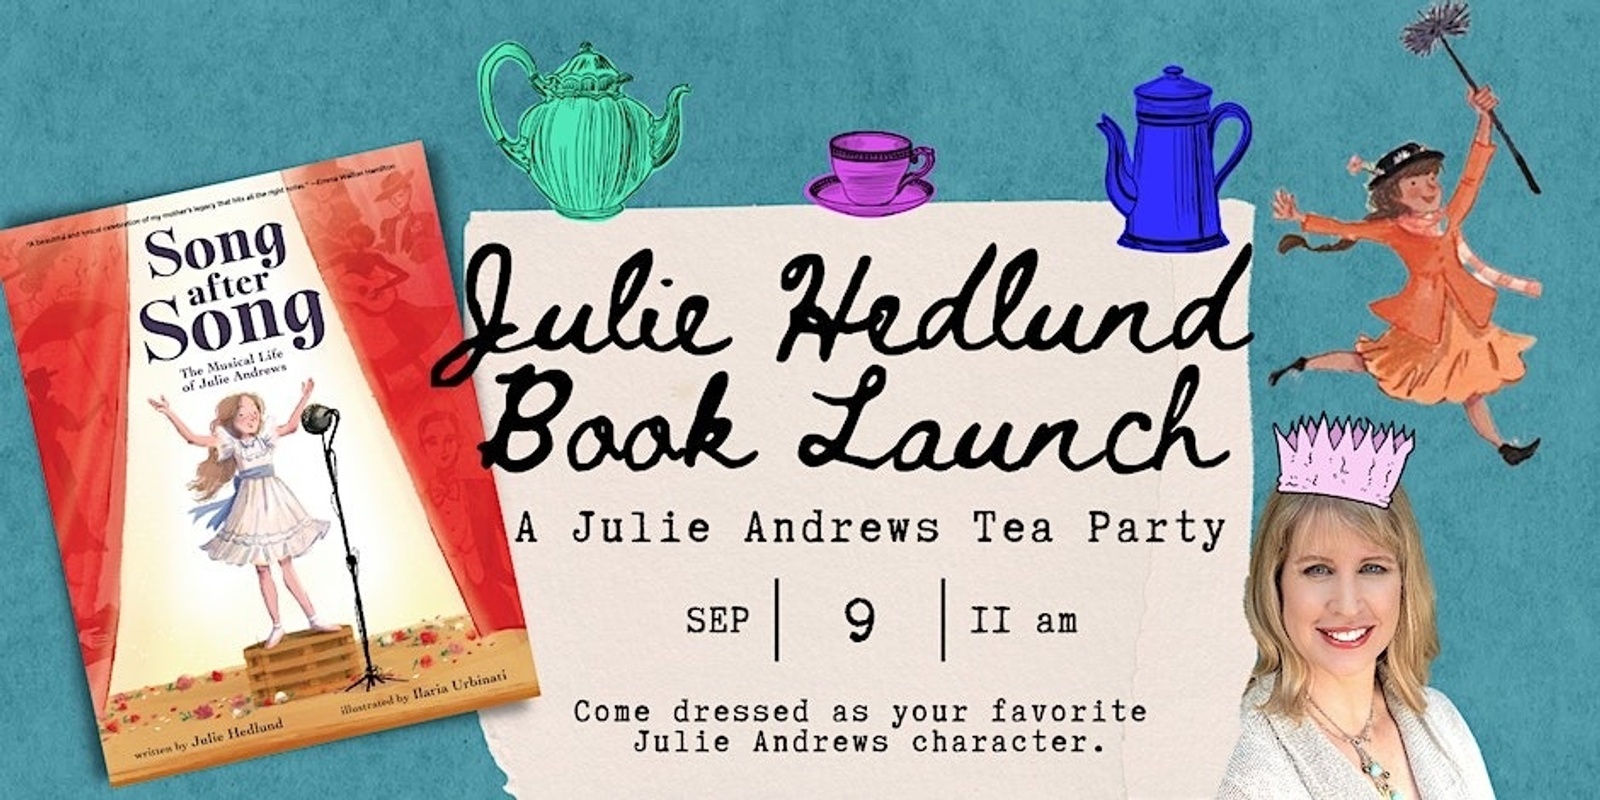 Banner image for Julie Hedlund Book Launch Tea Party